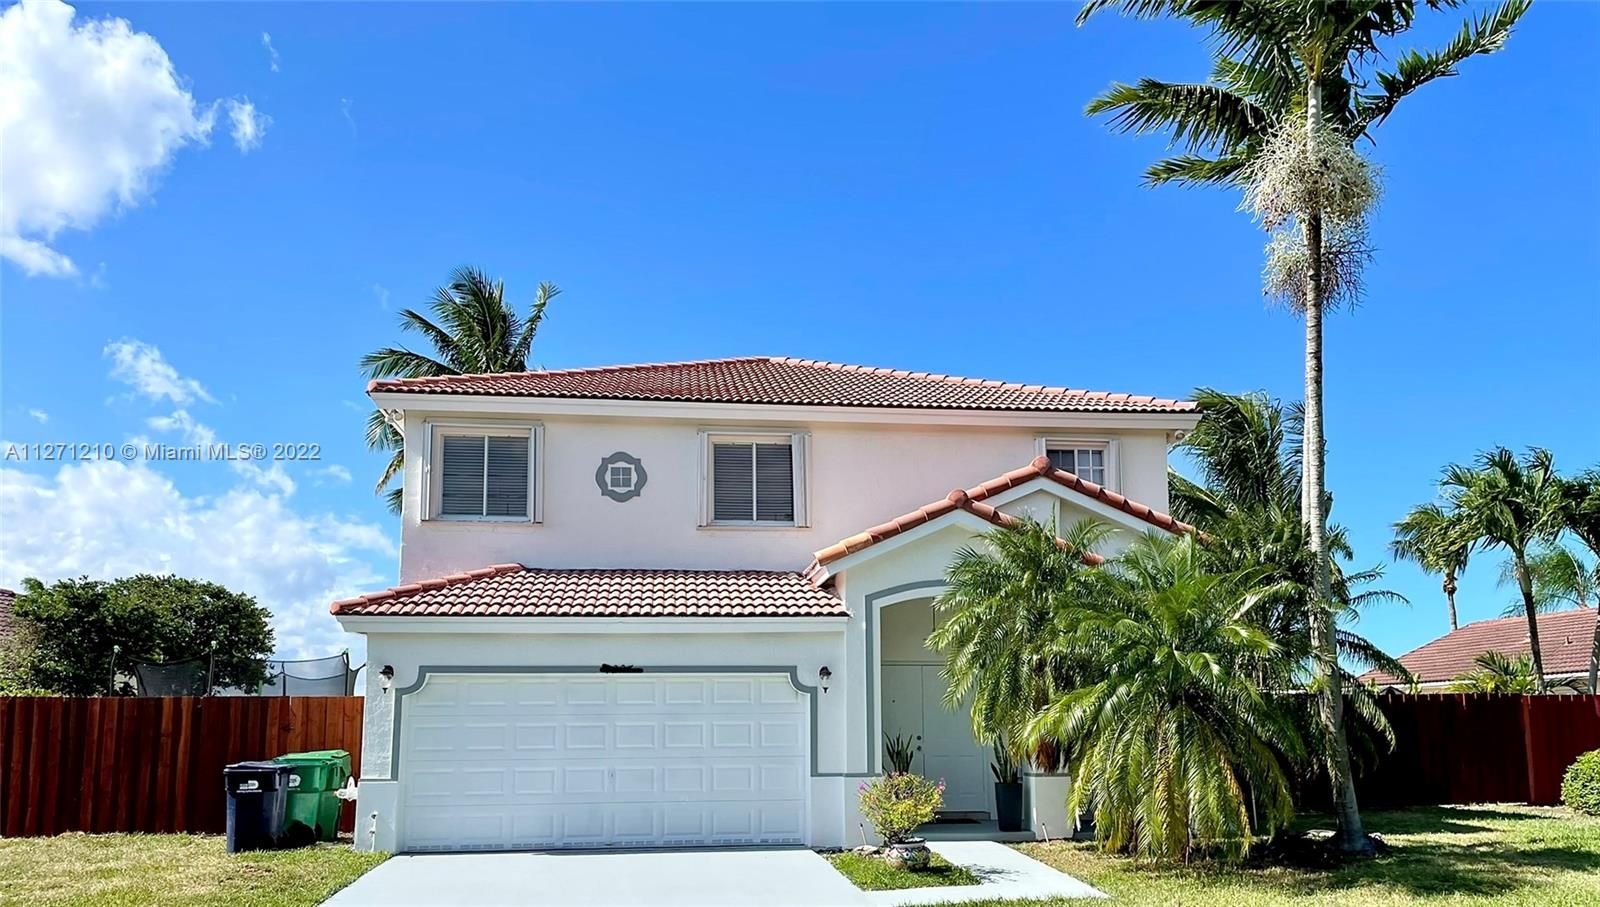 Real estate property located at 9227 215th Ter, Miami-Dade County, Cutler Bay, FL